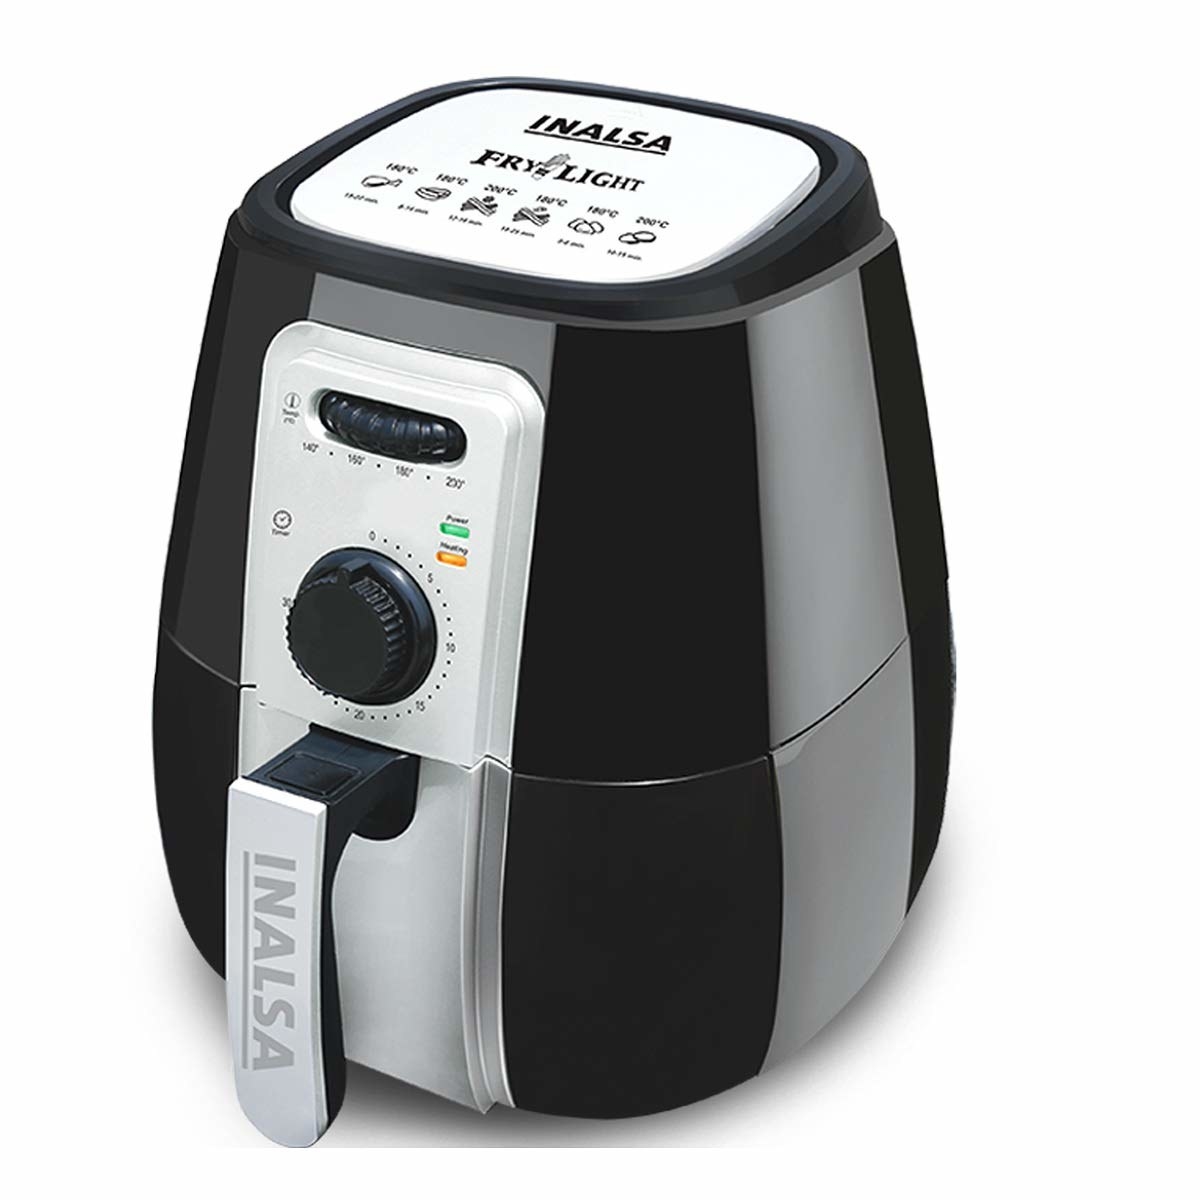 A black and grey air fryer 